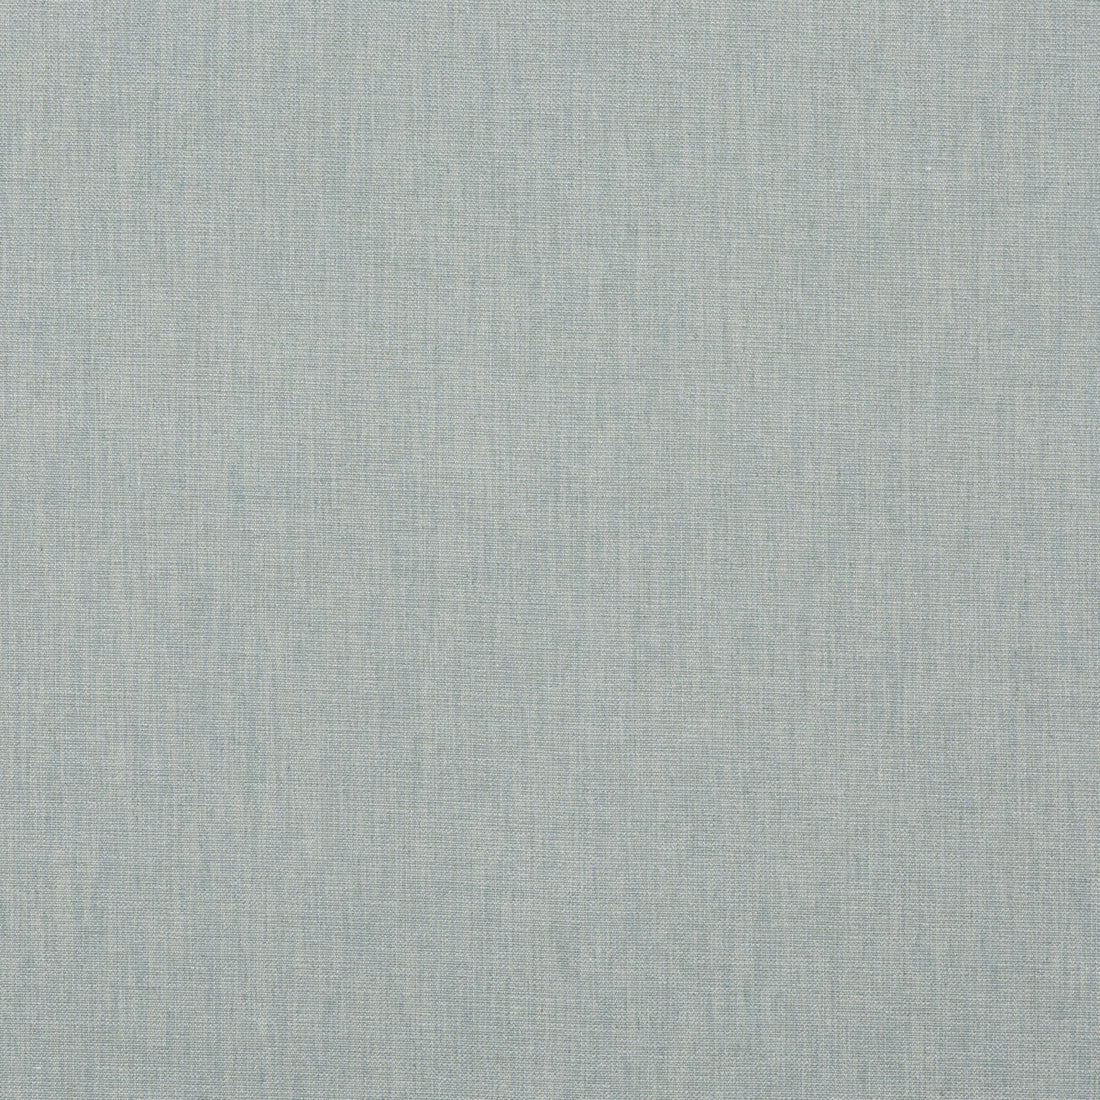 Darwen fabric in soft teal color - pattern BF10957.606.0 - by G P &amp; J Baker in the Baker House Textures collection